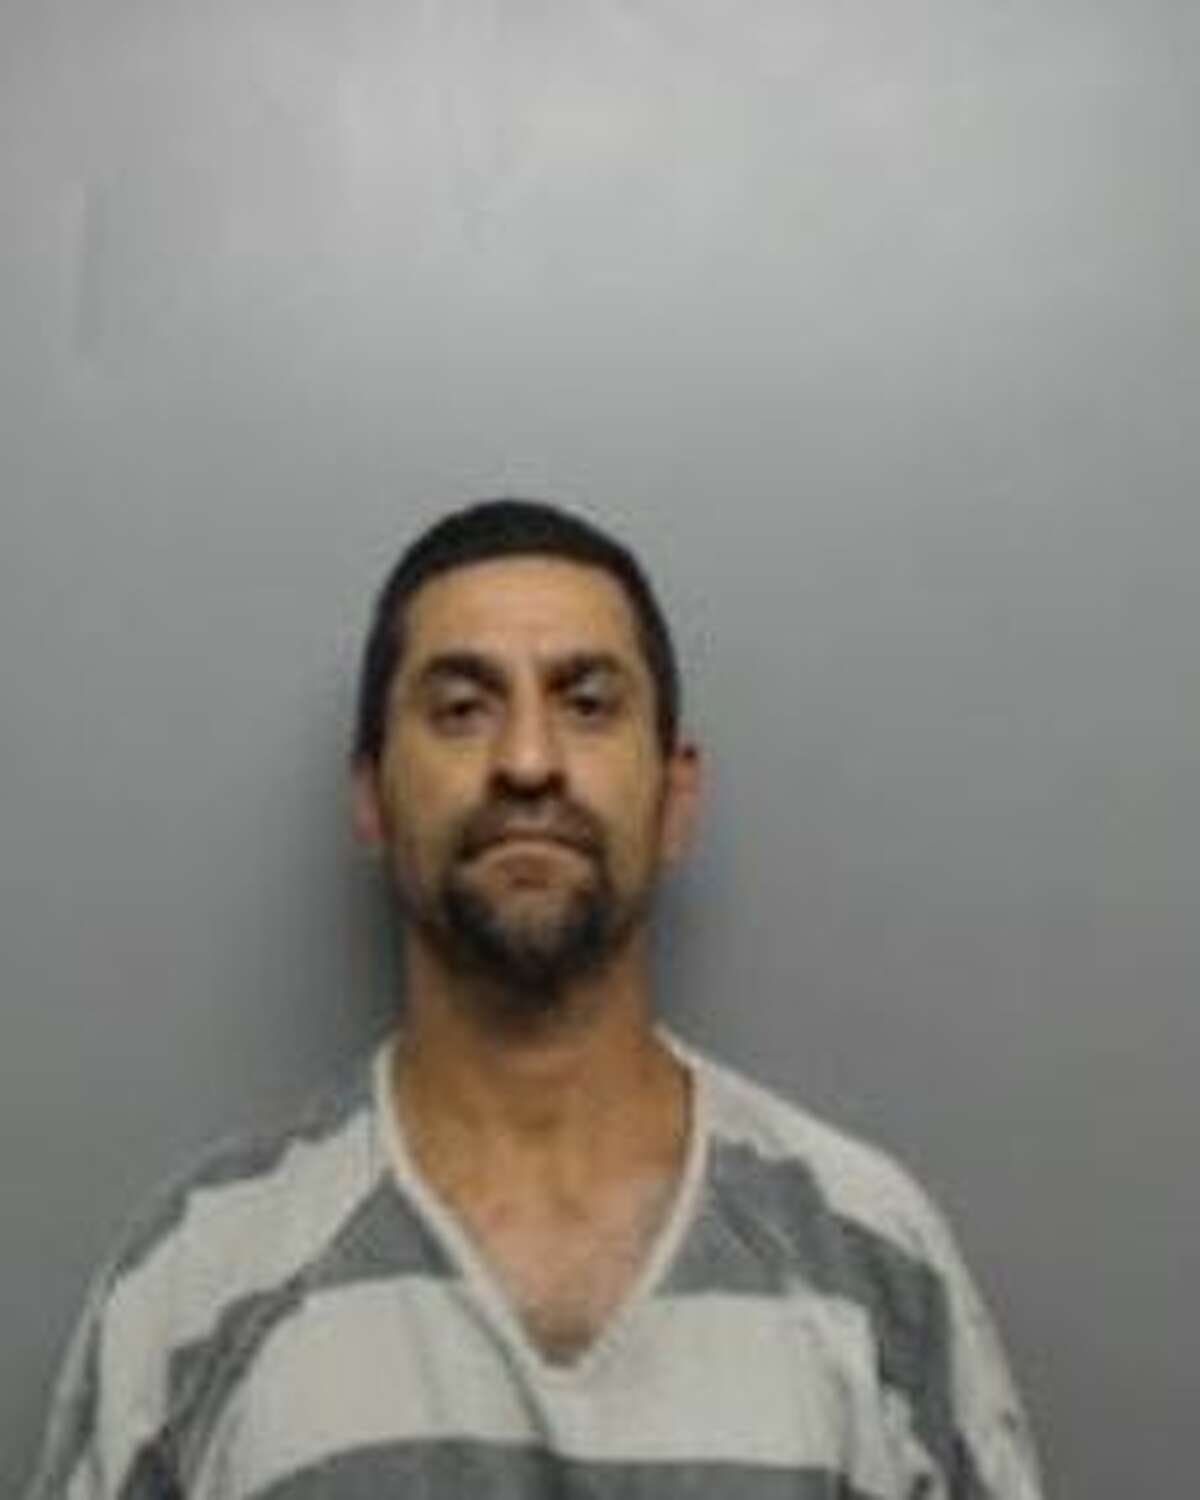 Sergio San Miguel, 49, was arrested and charged with aggravated assault with a deadly weapon.